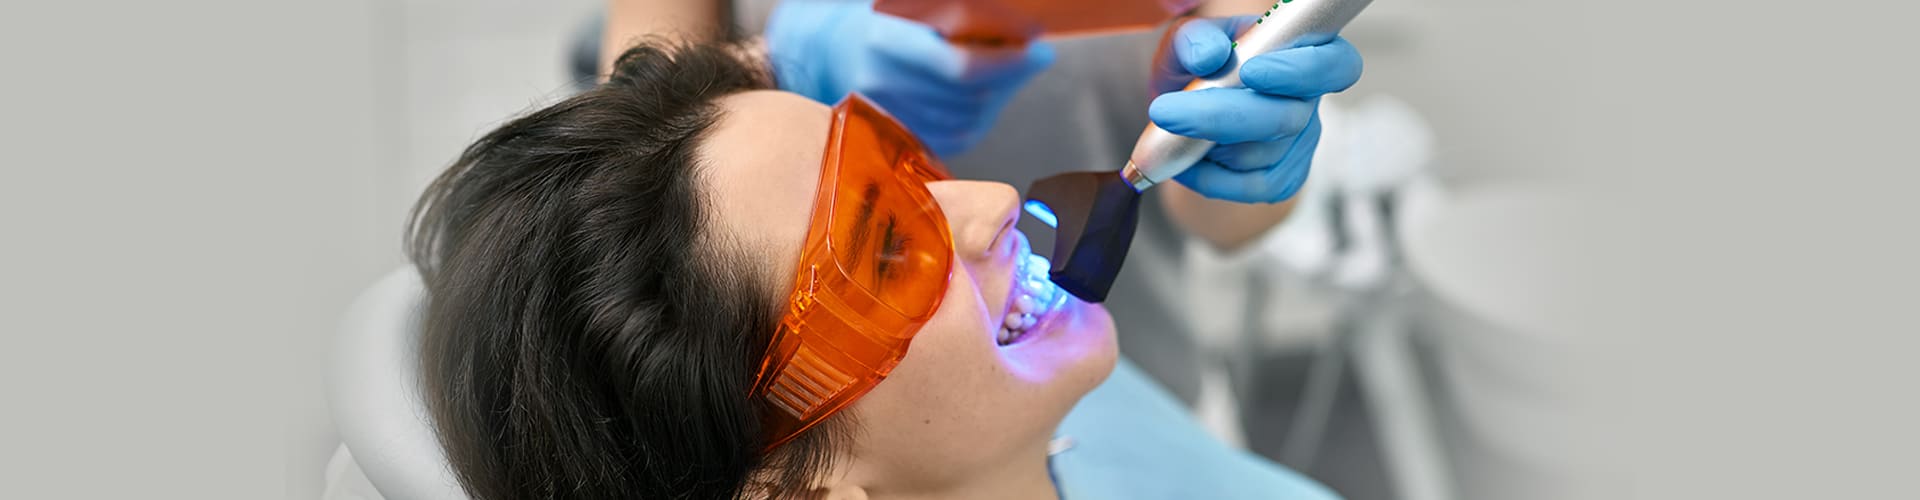 Teeth whitening blue light procedure on a smiling female patient.